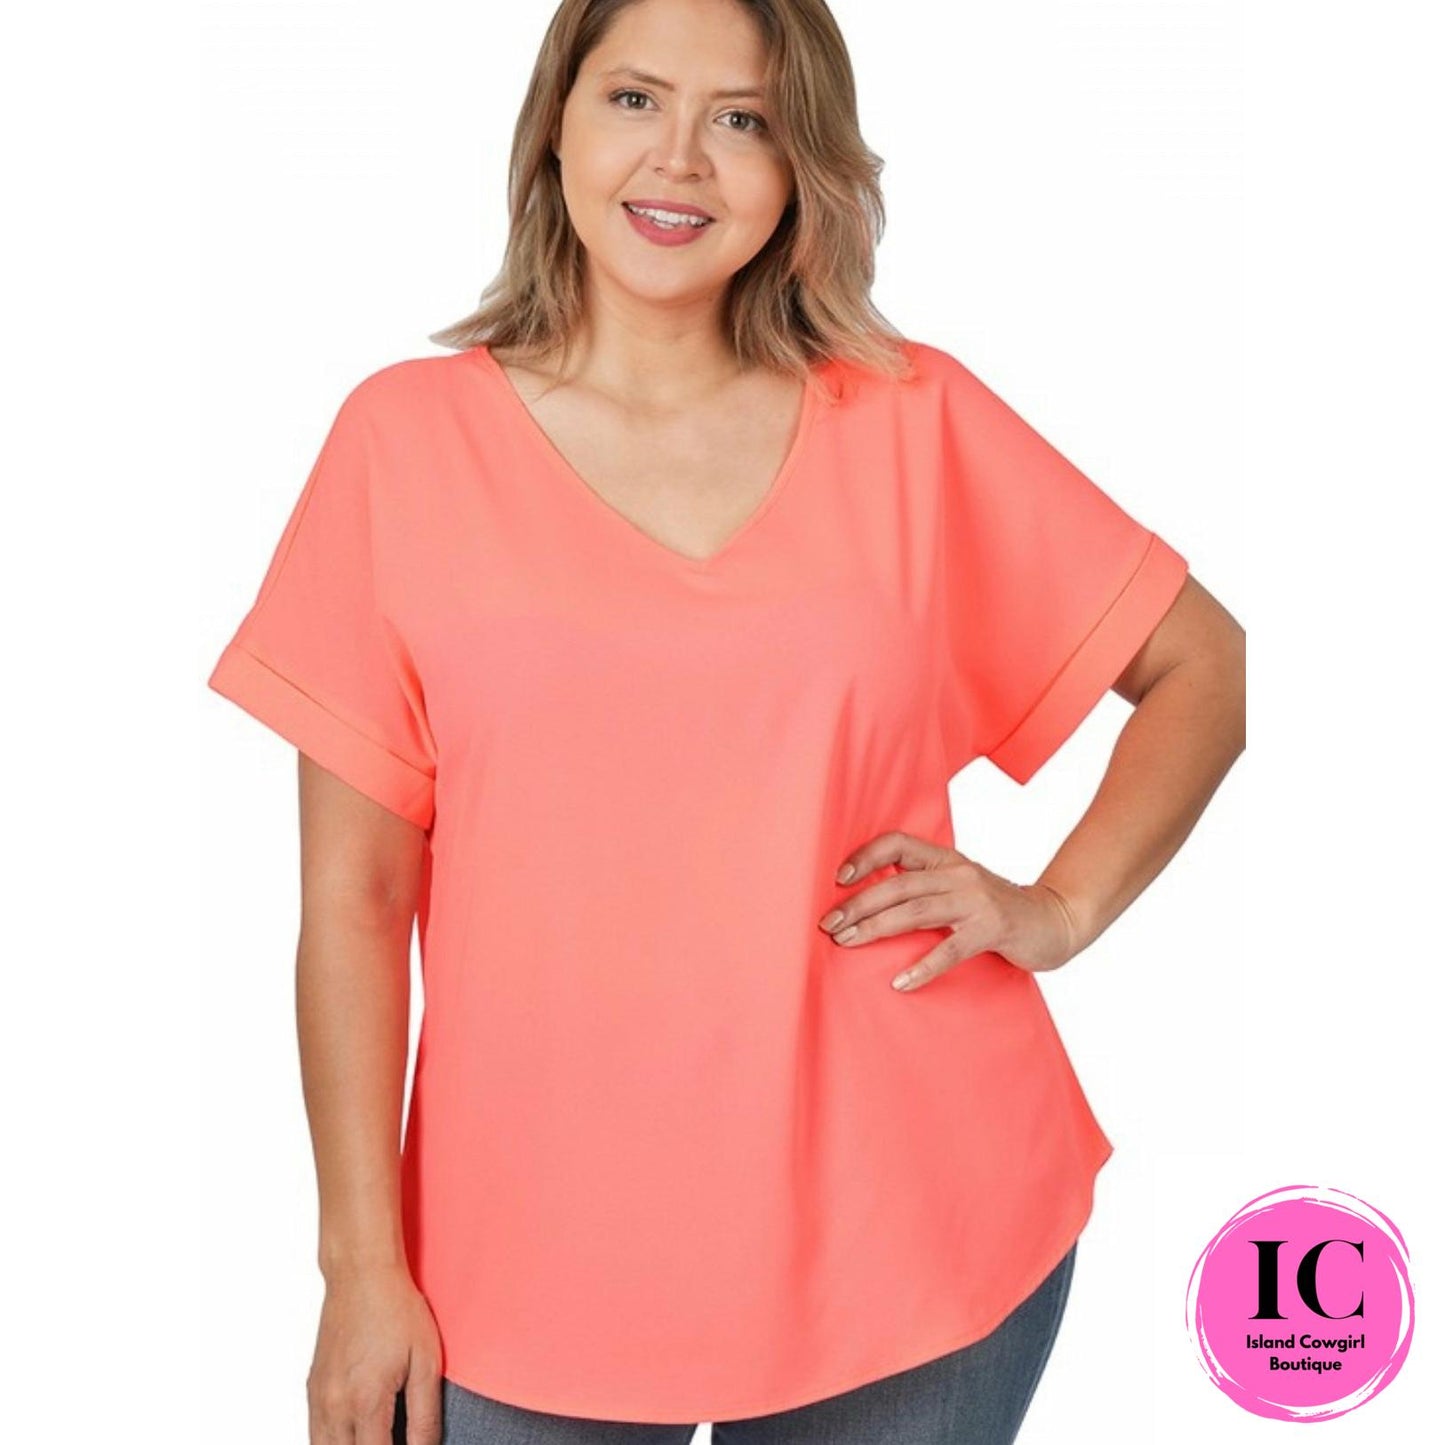 Curvy Girl Take A Look Coral Top